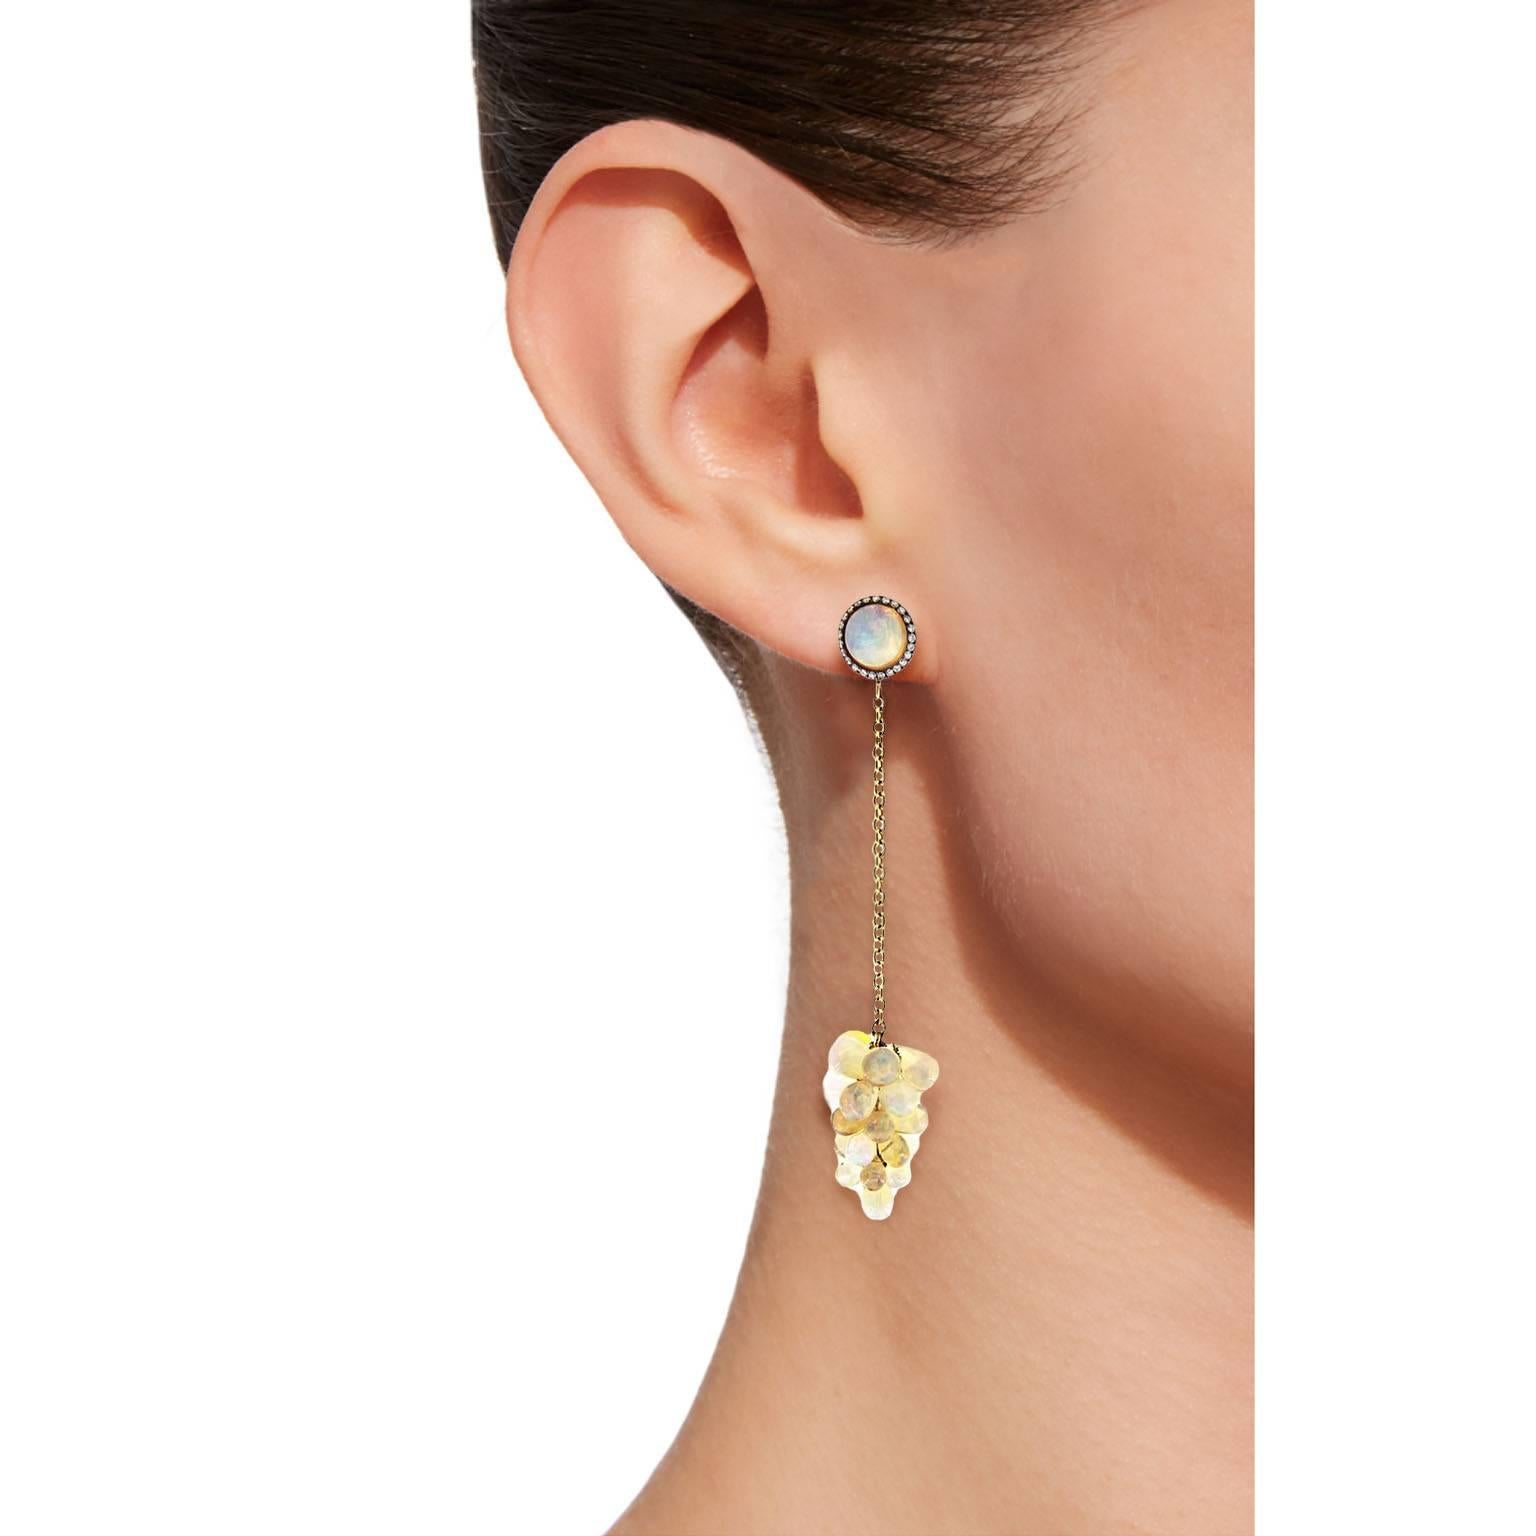 Jona design collection, hand crafted in Italy, 18 karat gold, beautiful cluster drop earrings, featuring 17.35 carats of natural Opals suspending from two round opals weighing 2.20 carats in total, surrounded by 0.19 carats of white diamonds. Posts